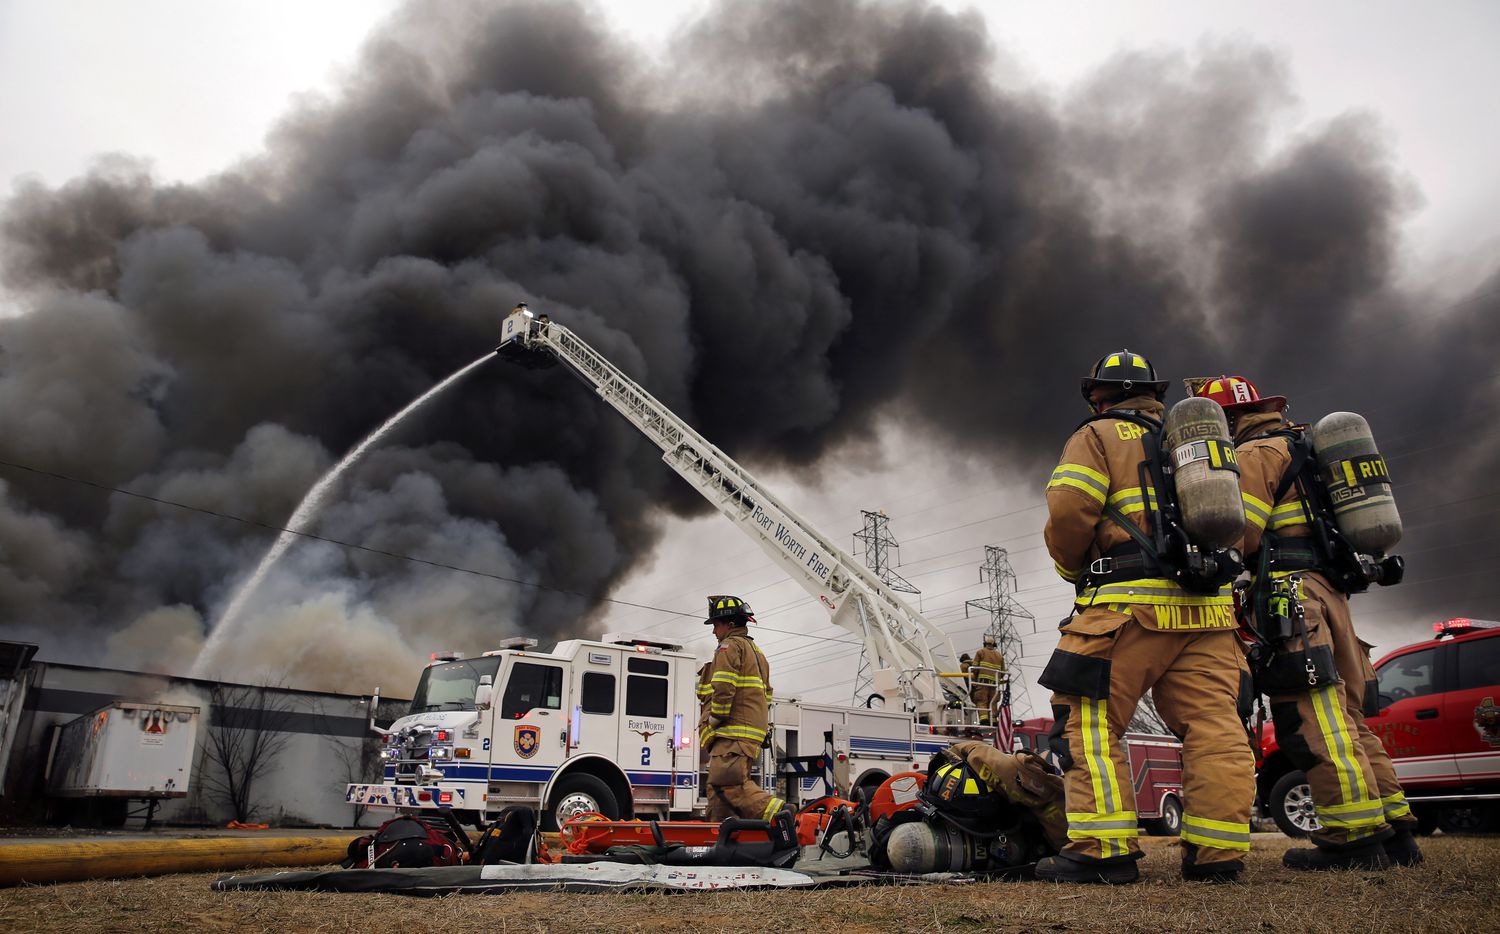 Fort Worth firefighters respond to a large 5-alarm fire at the Advanced Foam Recycling facility in Richland Hills, Texas, Thursday, February 25, 2021. Advanced Foam Recycling recycles materials to be processed and used for carpet underlay, pillows, and furniture, according to the company website. Over 125 firefighters from Richland Hills, Haltom City, North Richland Hills and Fort Worth assisted on the commercial structure fire in the 2500 block of Handley Ederville Road in E. Fort Worth. (Tom Fox/The Dallas Morning News)